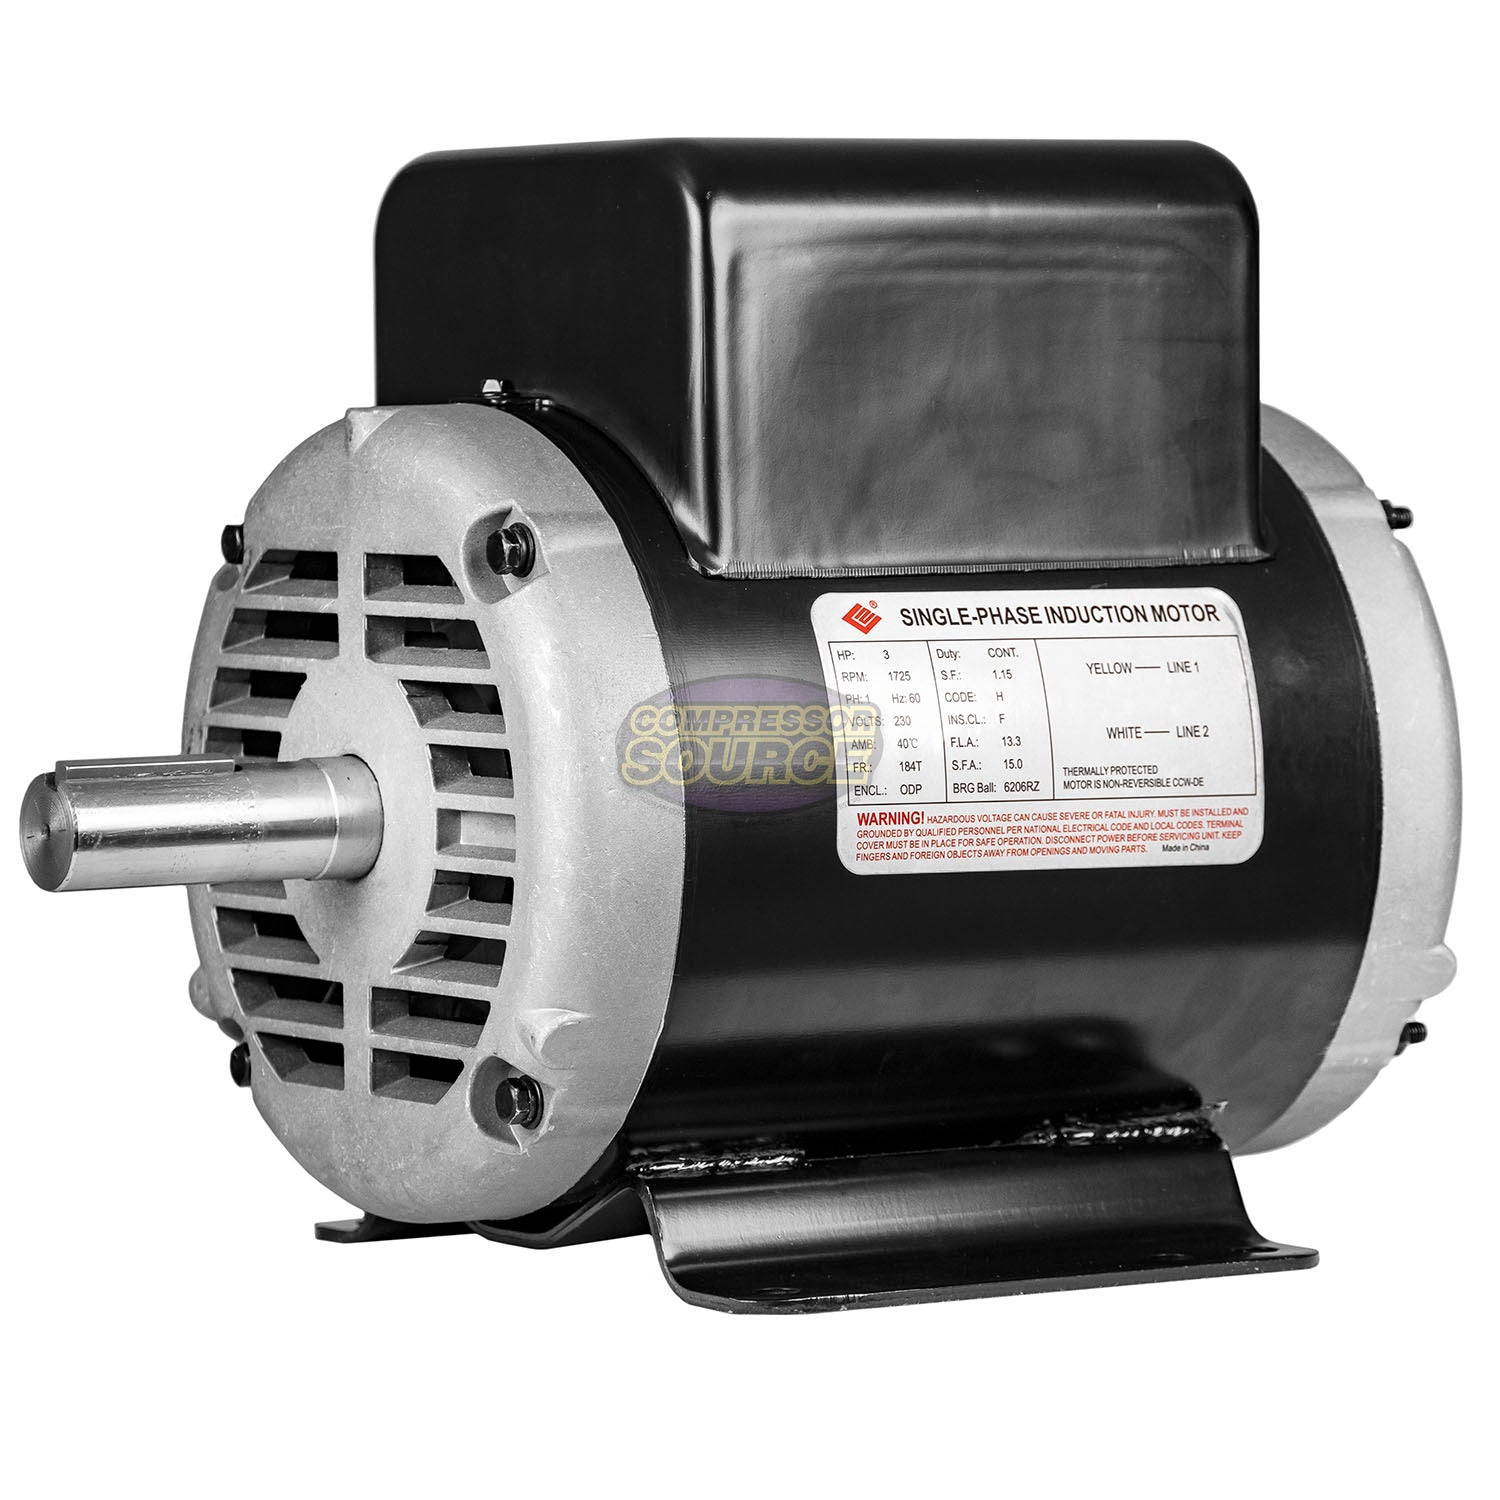 ﻿﻿3 HP Electric Motor Single Phase 1725 RPM 230 Volts 1-1/8 Shaft